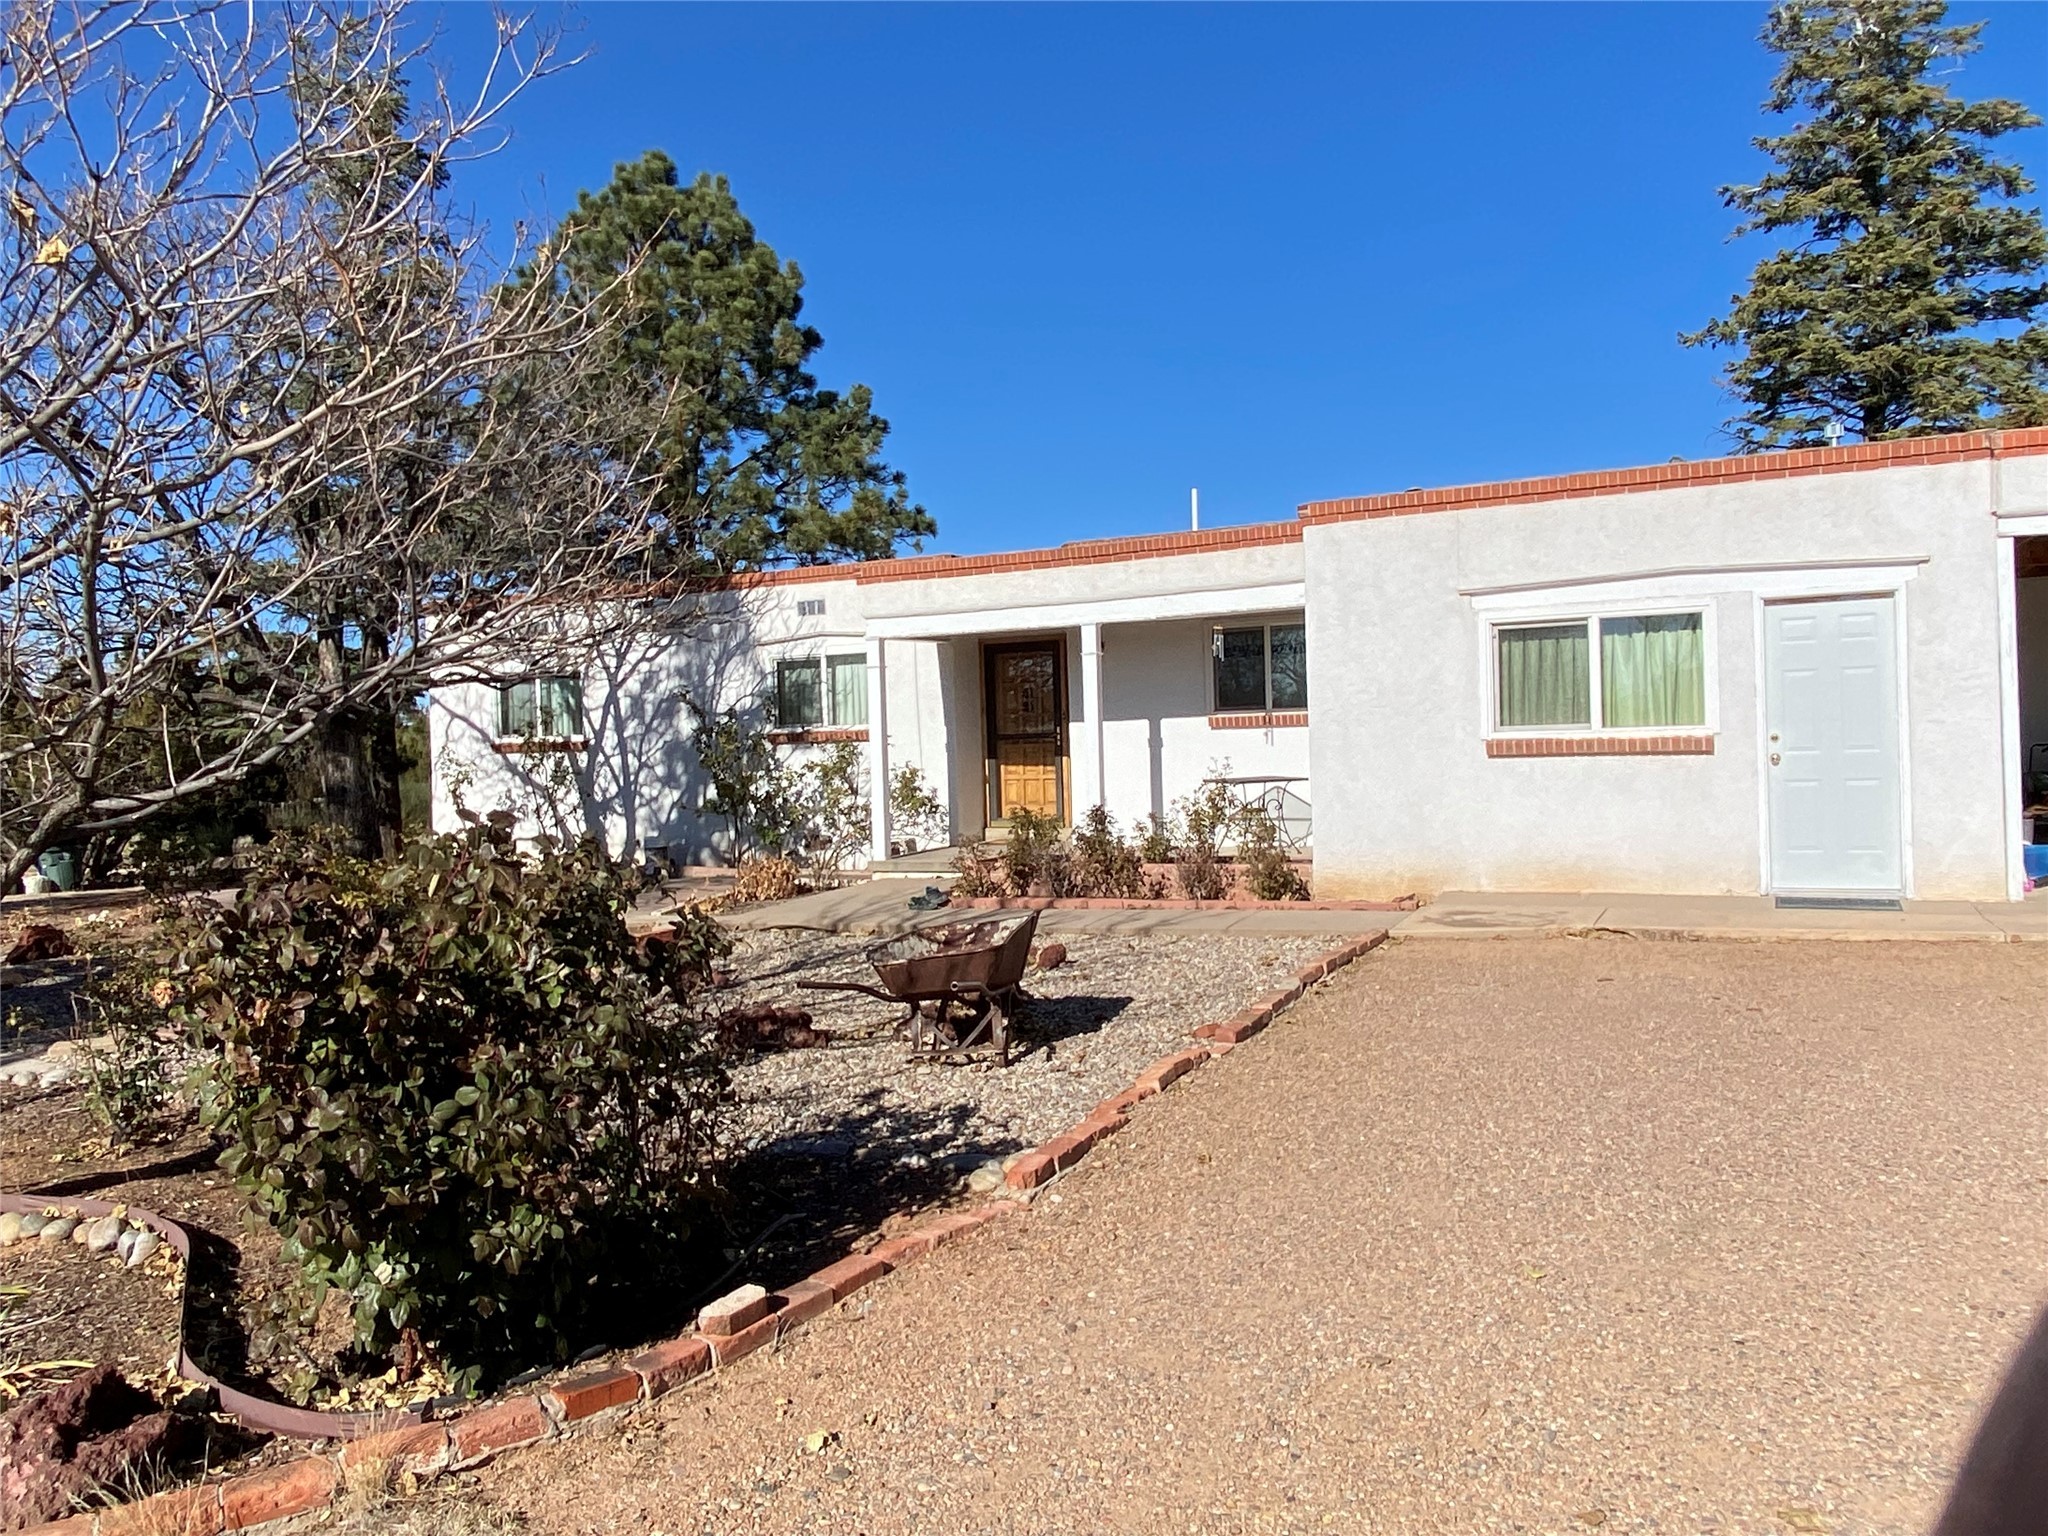 416 W San Mateo Road, Santa Fe, New Mexico 87505, 4 Bedrooms Bedrooms, ,2 BathroomsBathrooms,Residential,For Sale,416 W San Mateo Road,202234013